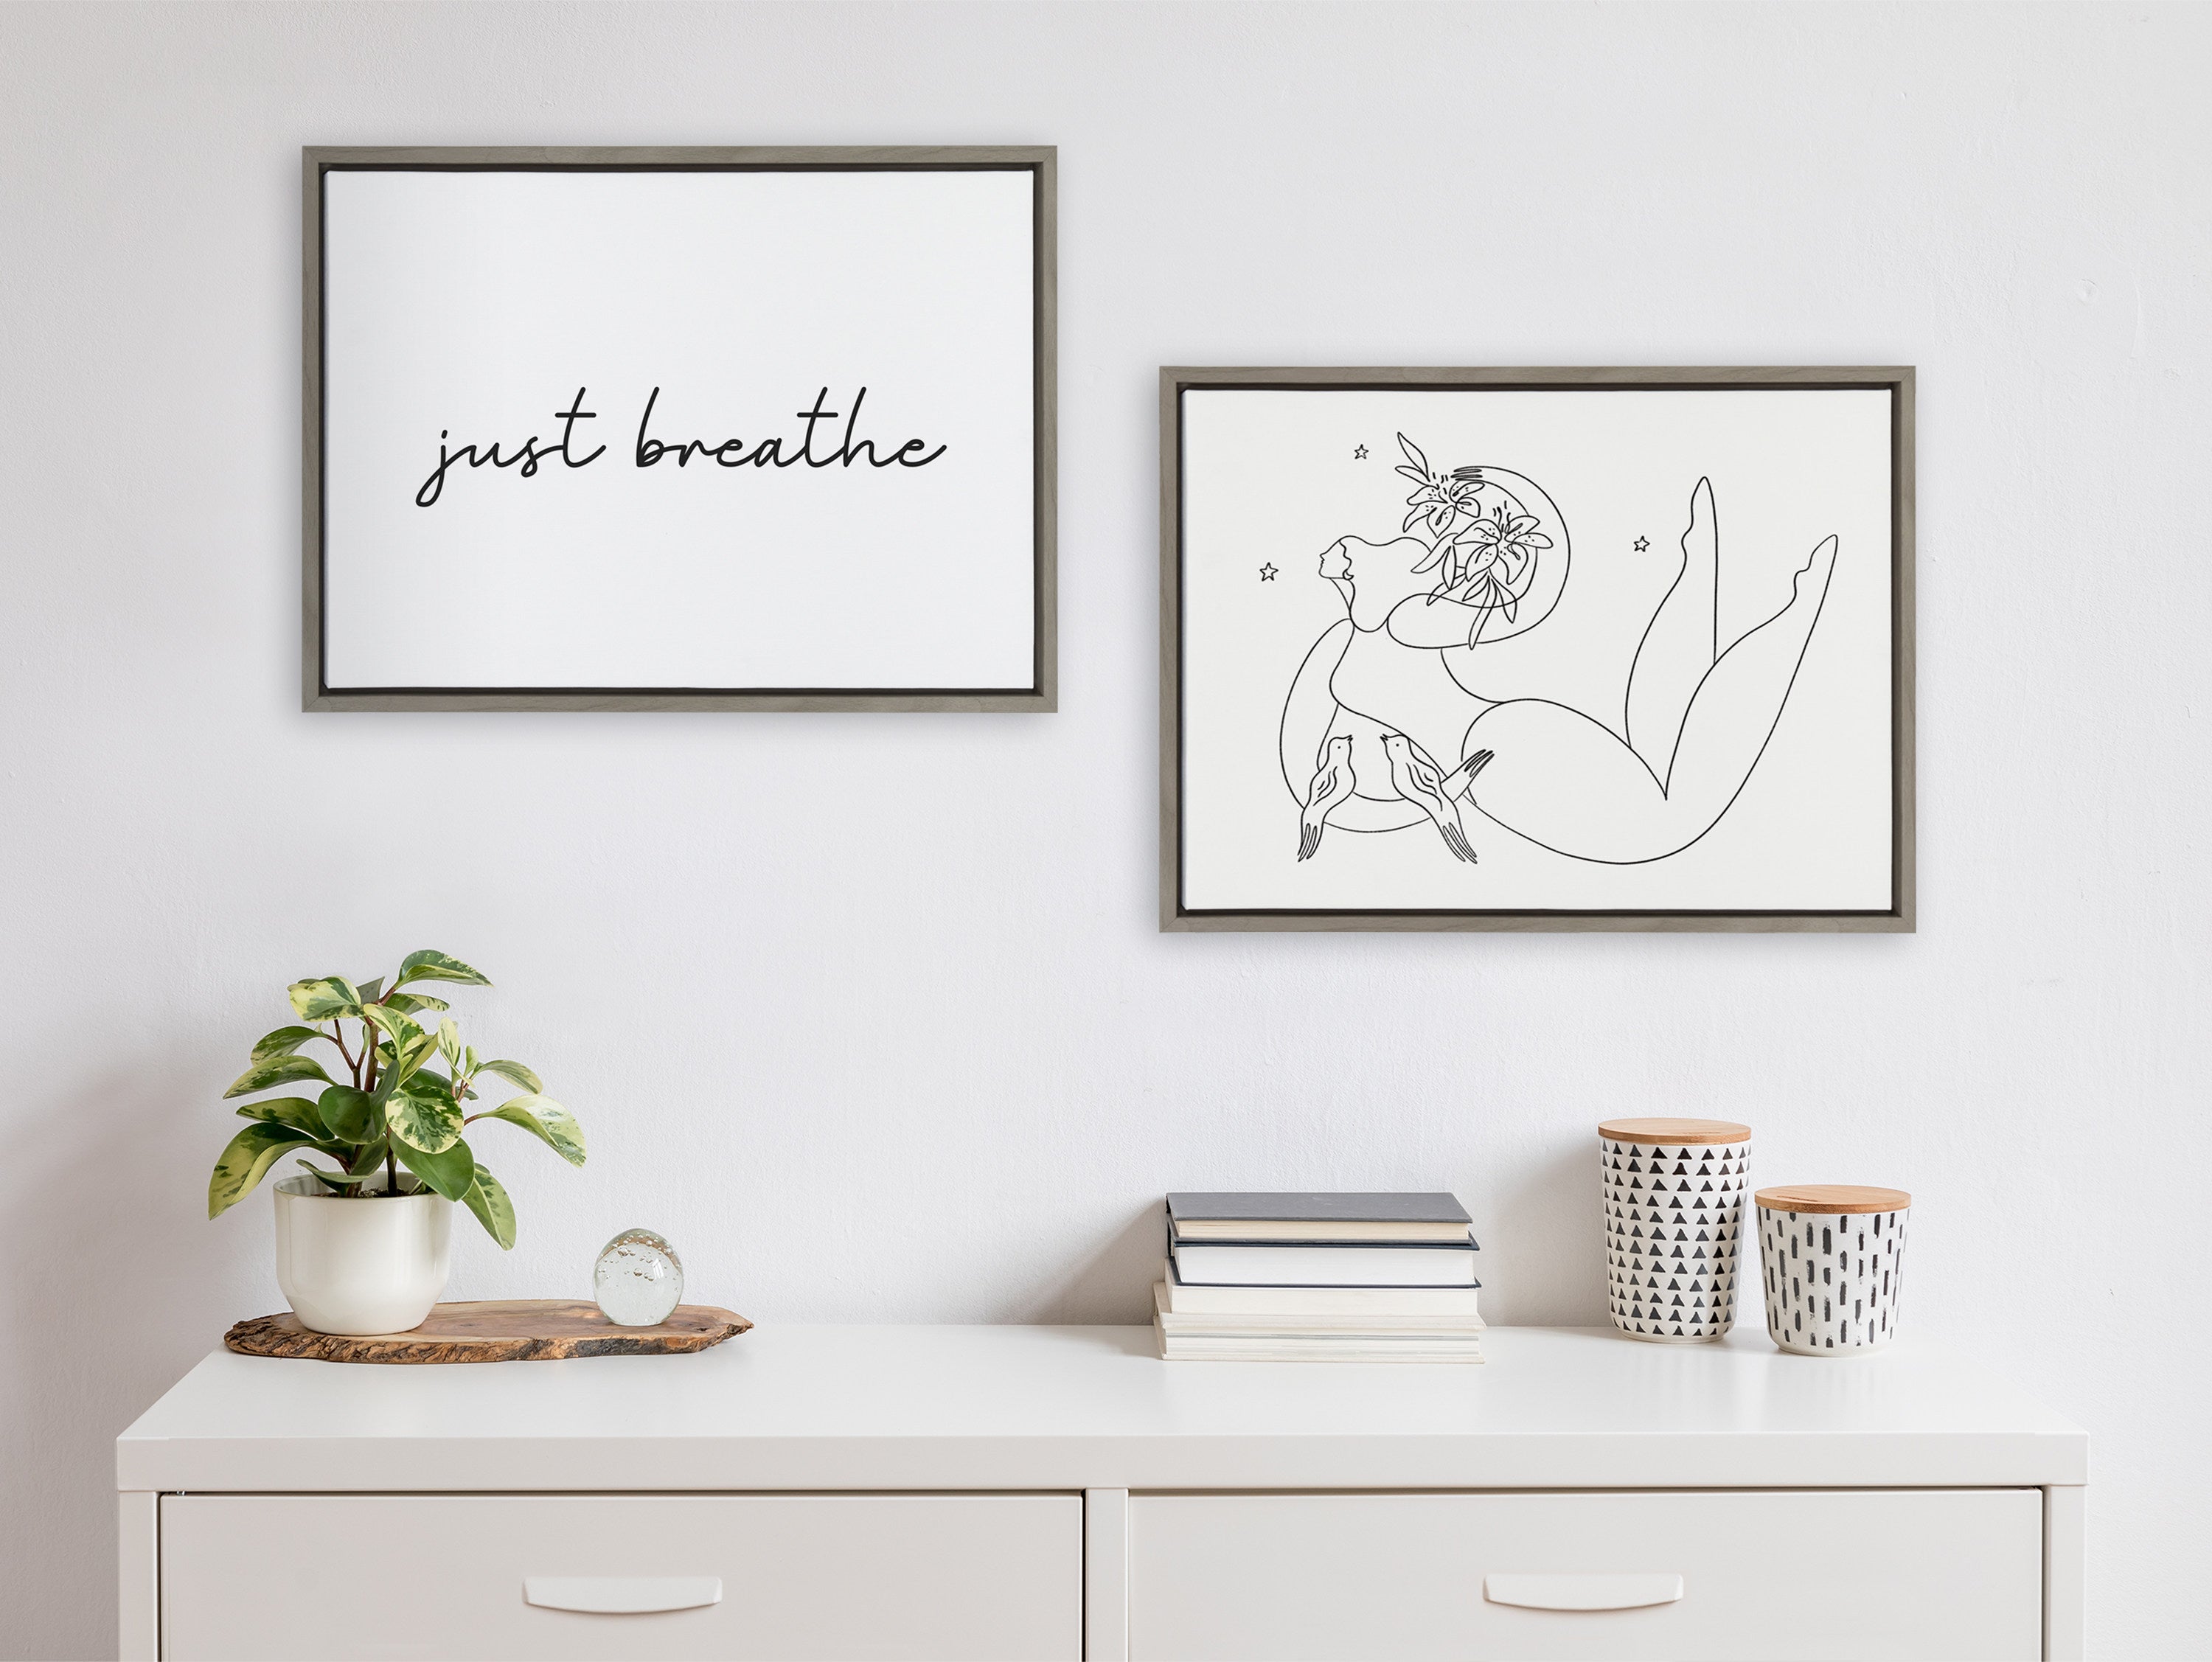 Sylvie Just Breathe Horizontal BW Framed Canvas by The Creative Bunch Studio